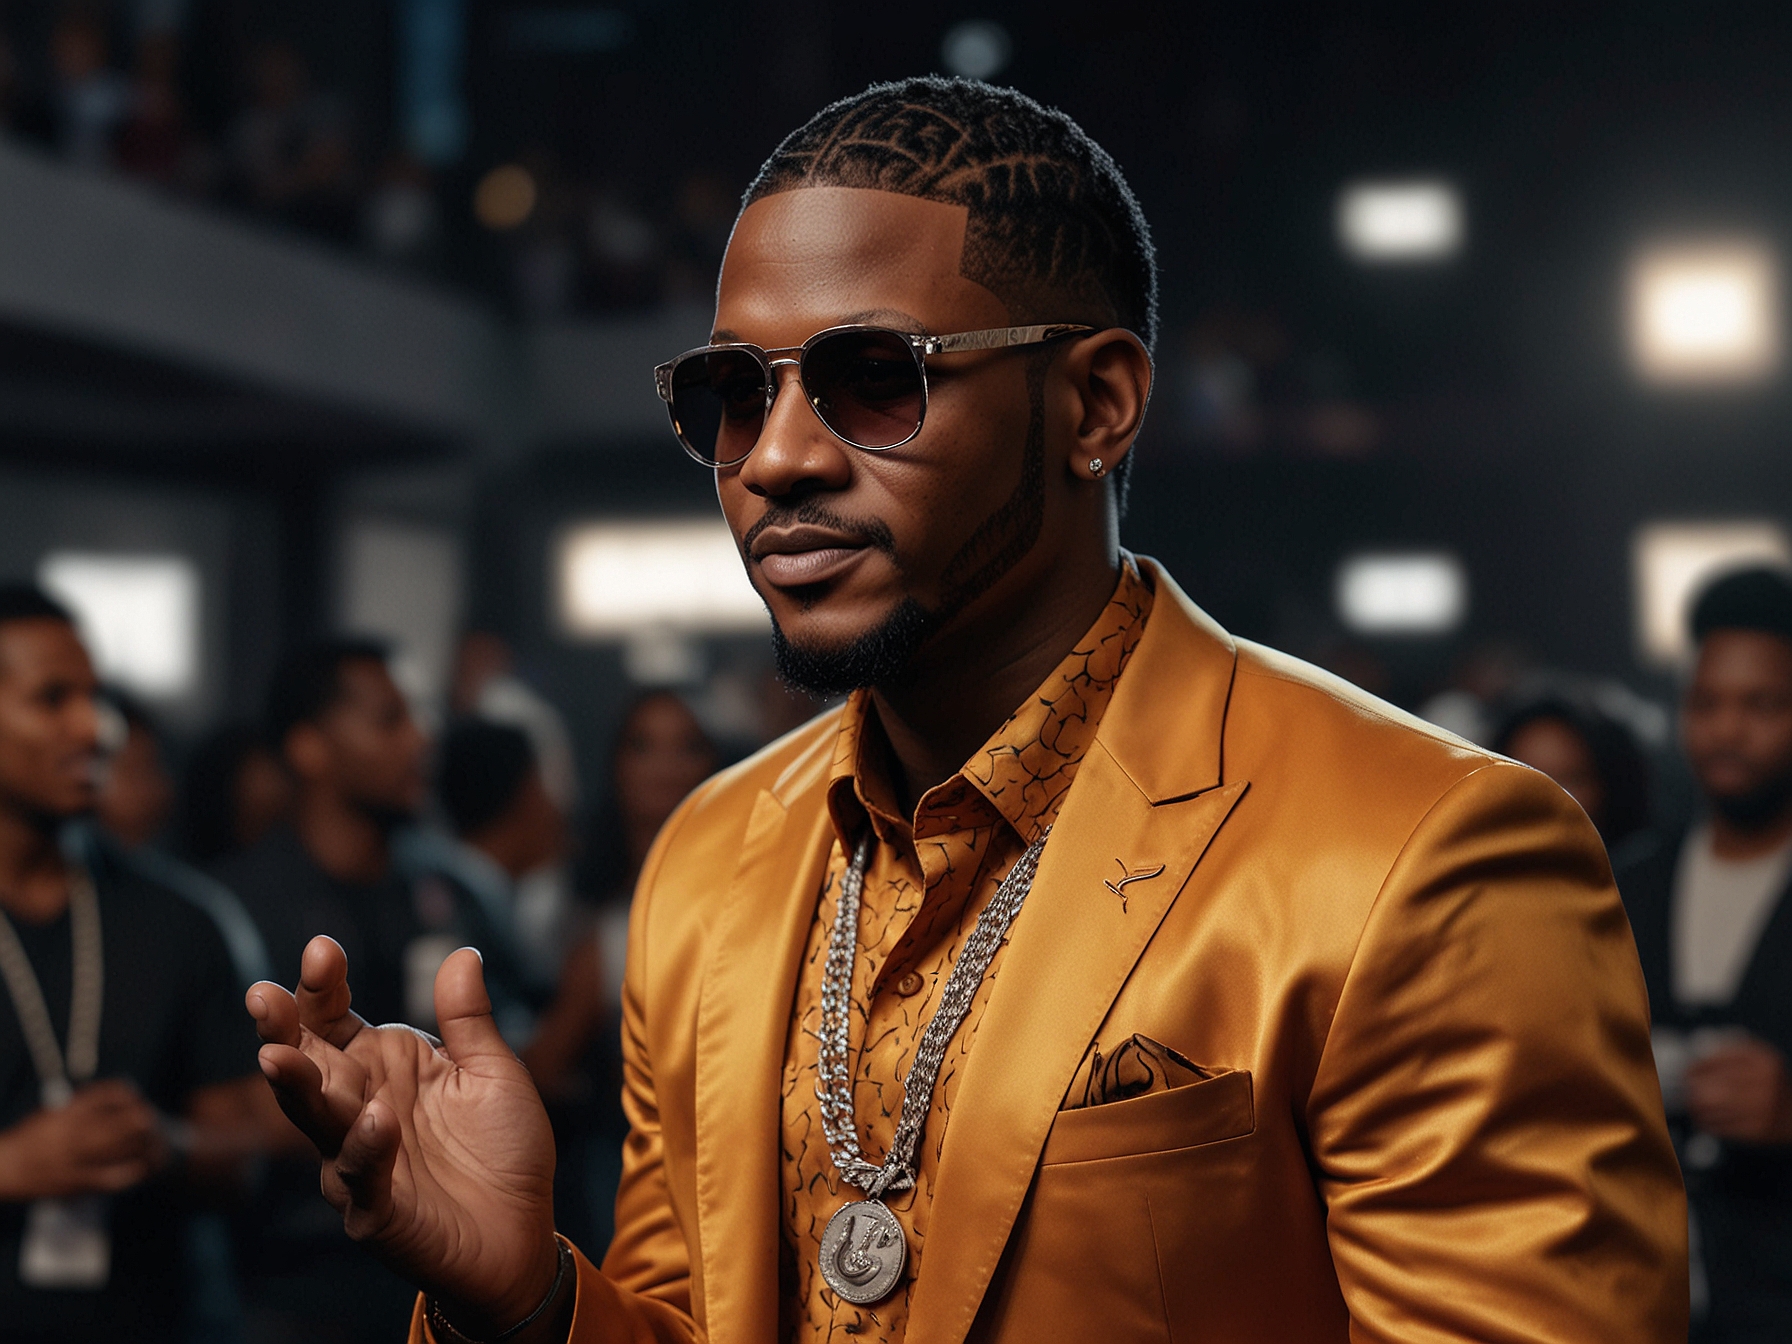 BossMan Dlow passionately discussing his musical journey and admiration for Usher, highlighting 'Confessions Part II' as his favorite Usher song, during the BET Awards 2024 red carpet interview.